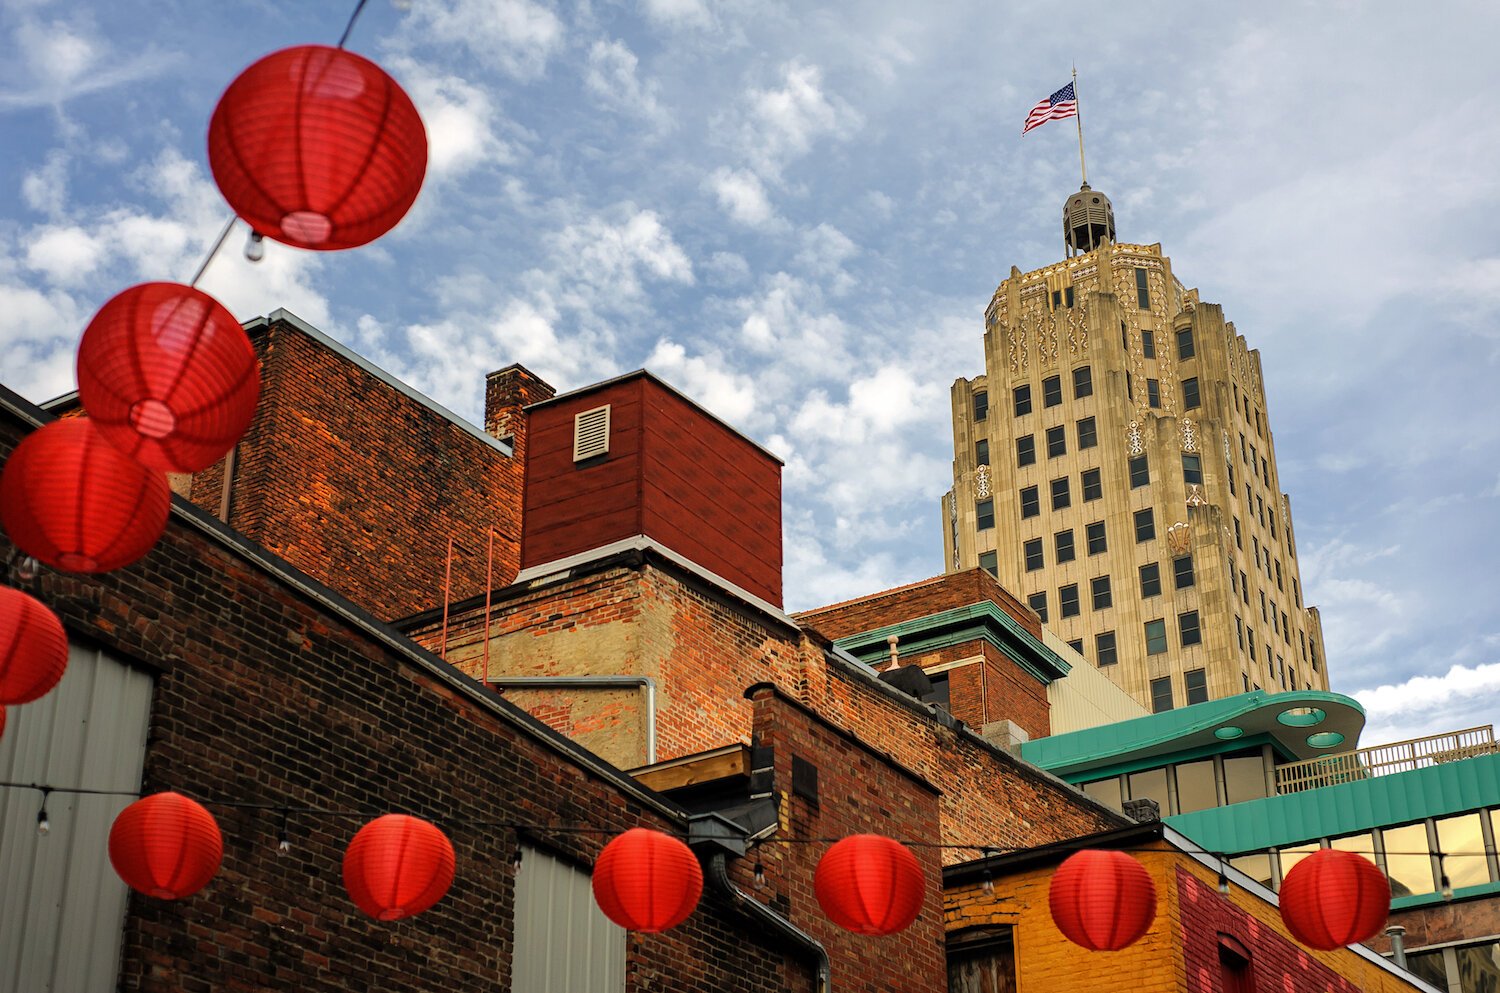 Hanging lanterns decorate the alley next to 816 Pint & Slice in downtown Fort Wayne.